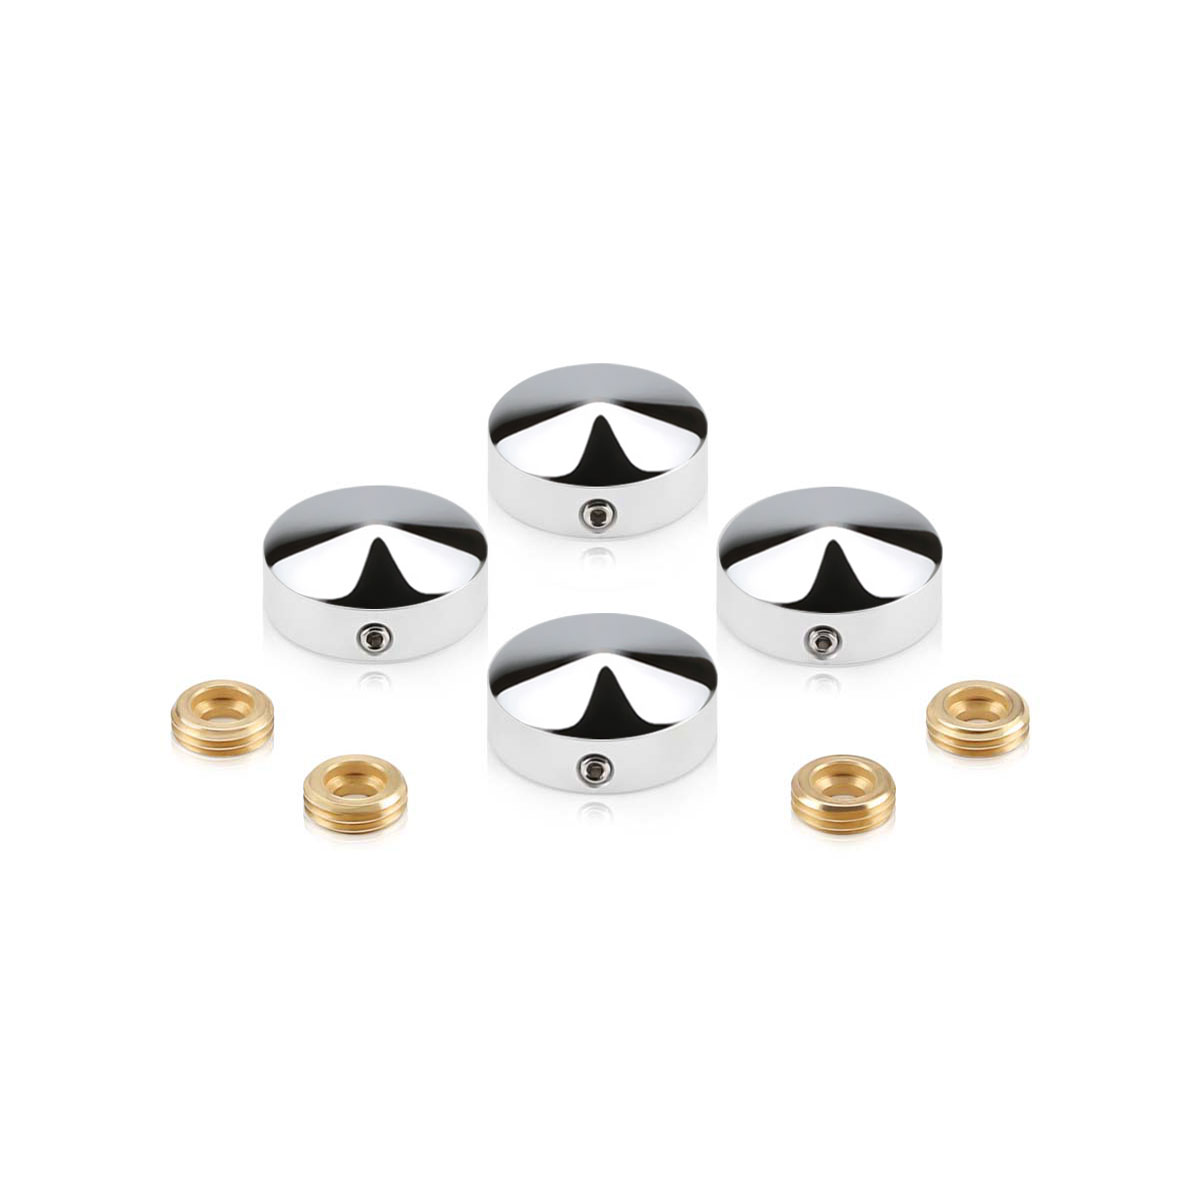 Set of 4 Conical Locking Screw Cover Diameter 7/8'', Polished Stainless Steel Finish (Indoor Use Only)